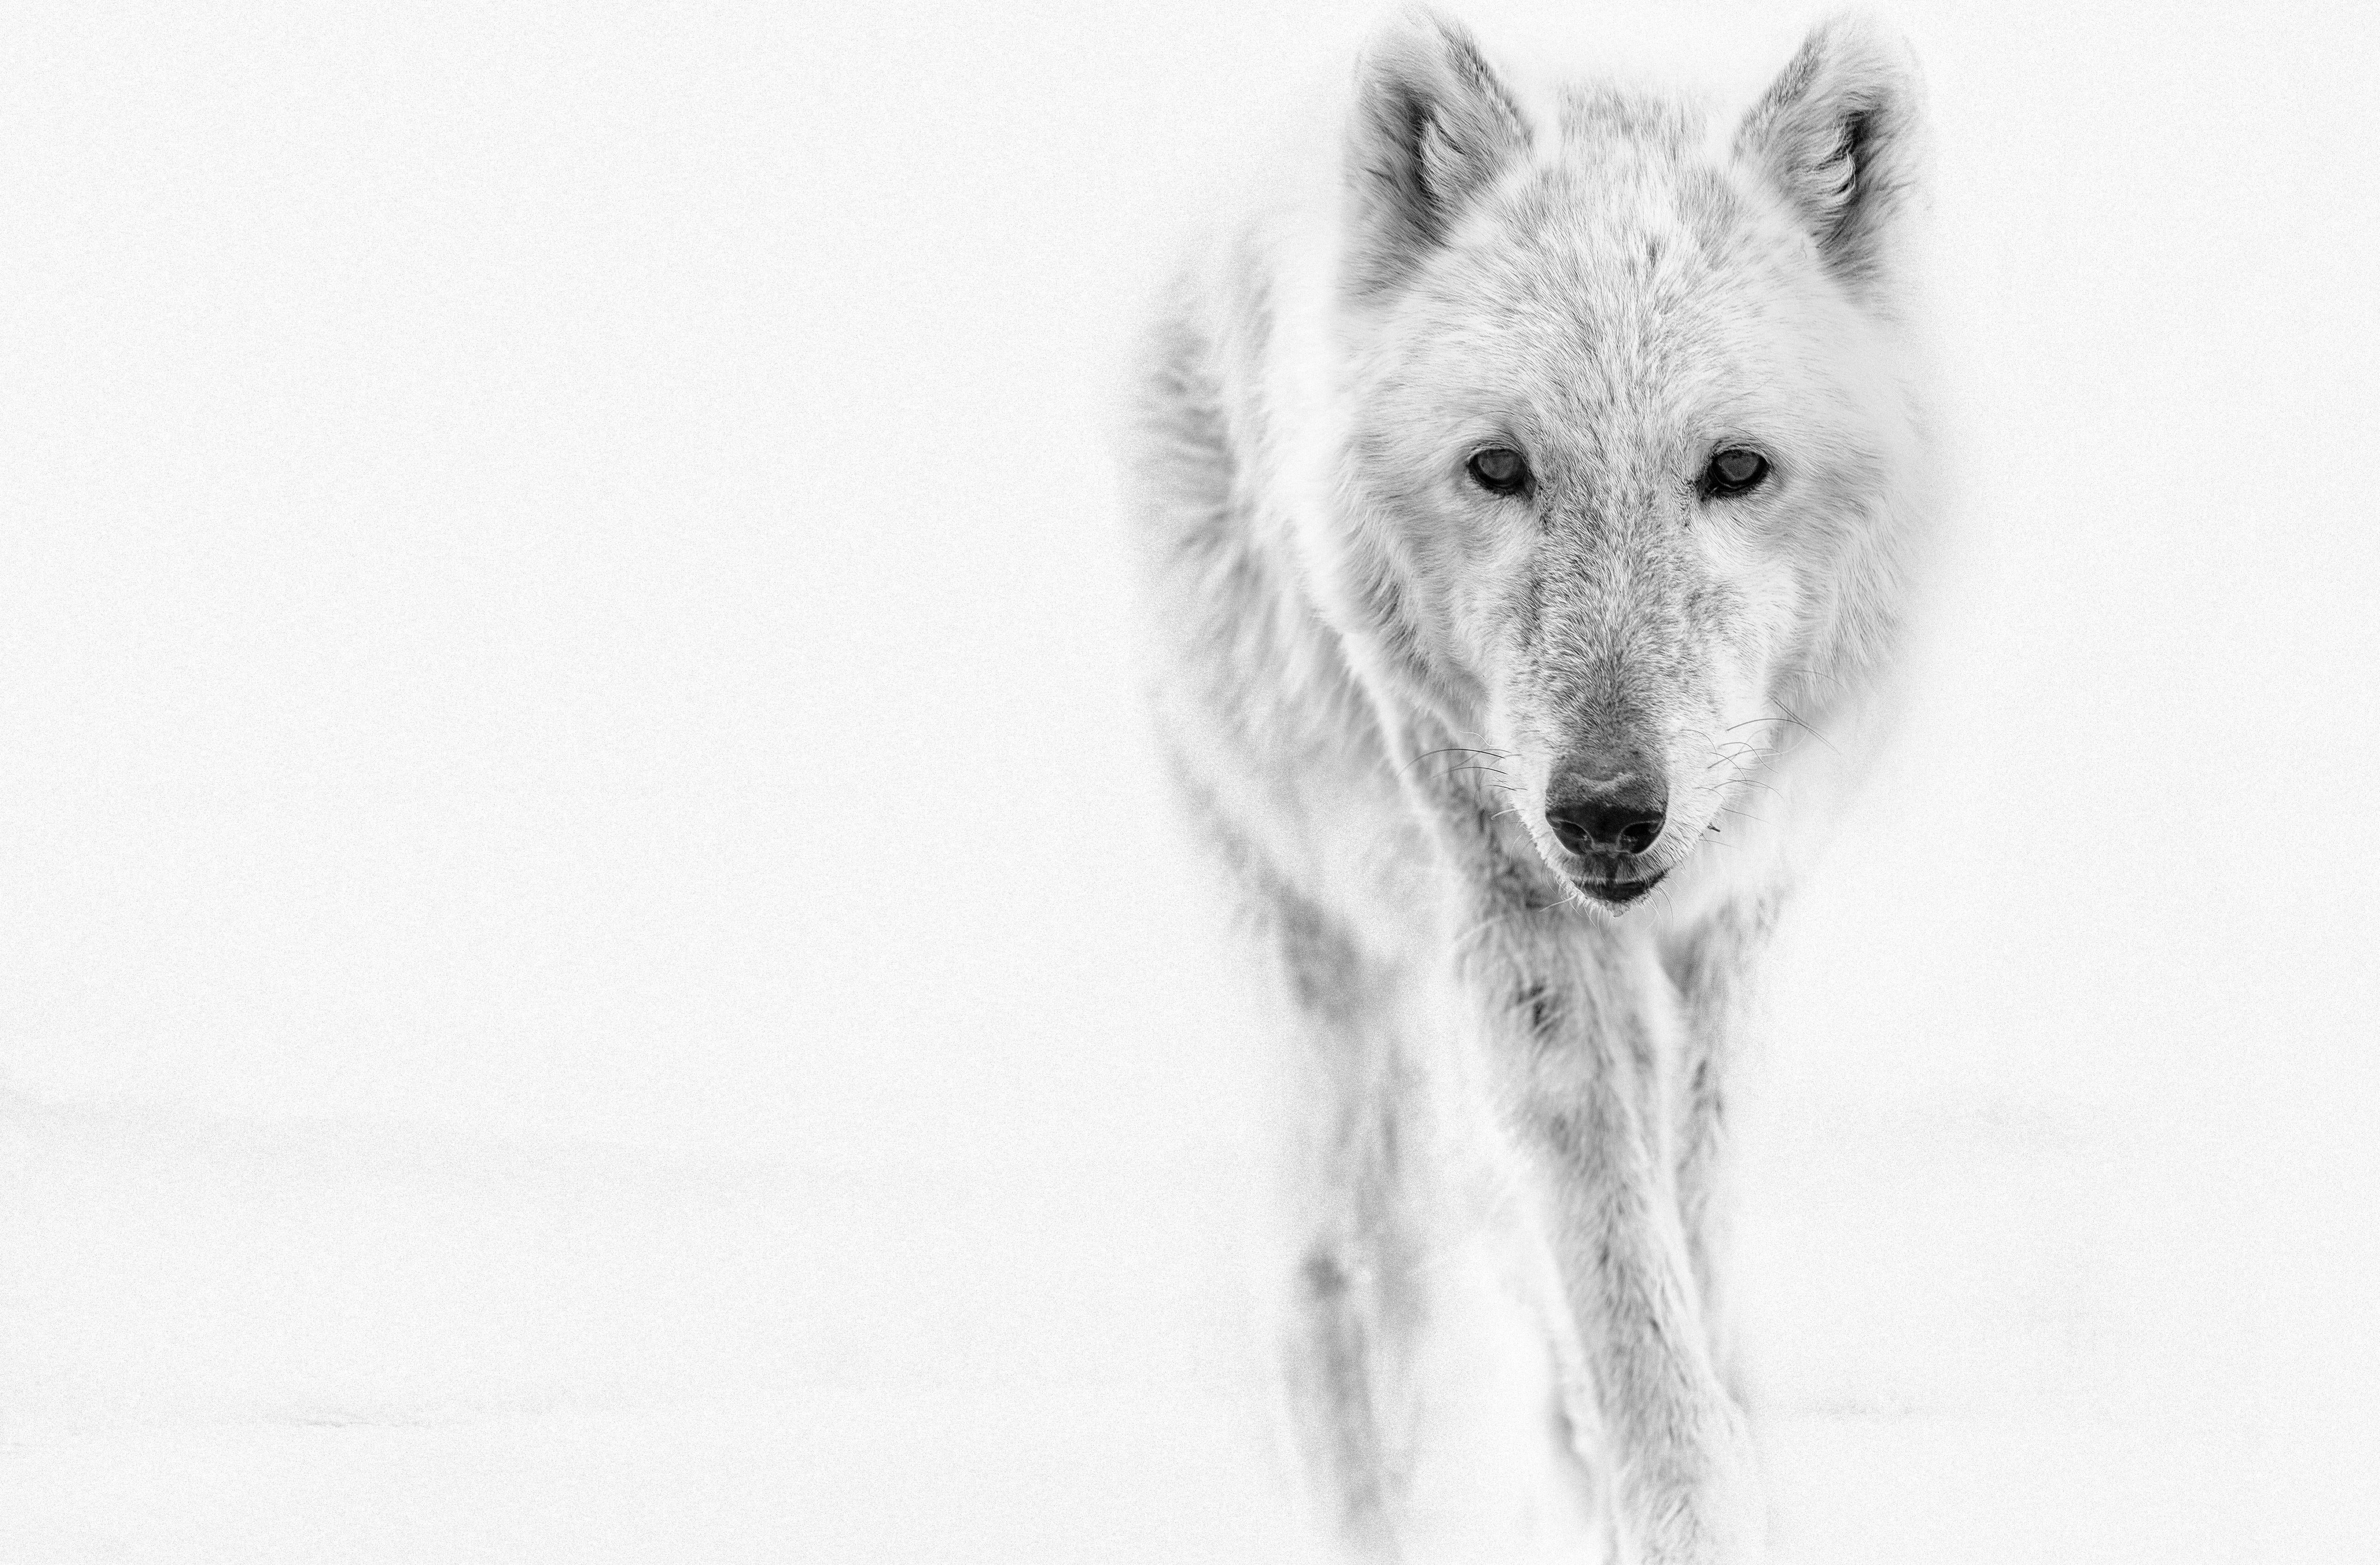 Shane Russeck Animal Print - "Arctic Wolf" 40x60  Black & White Photography, Wolves Photograph Unsigned Print